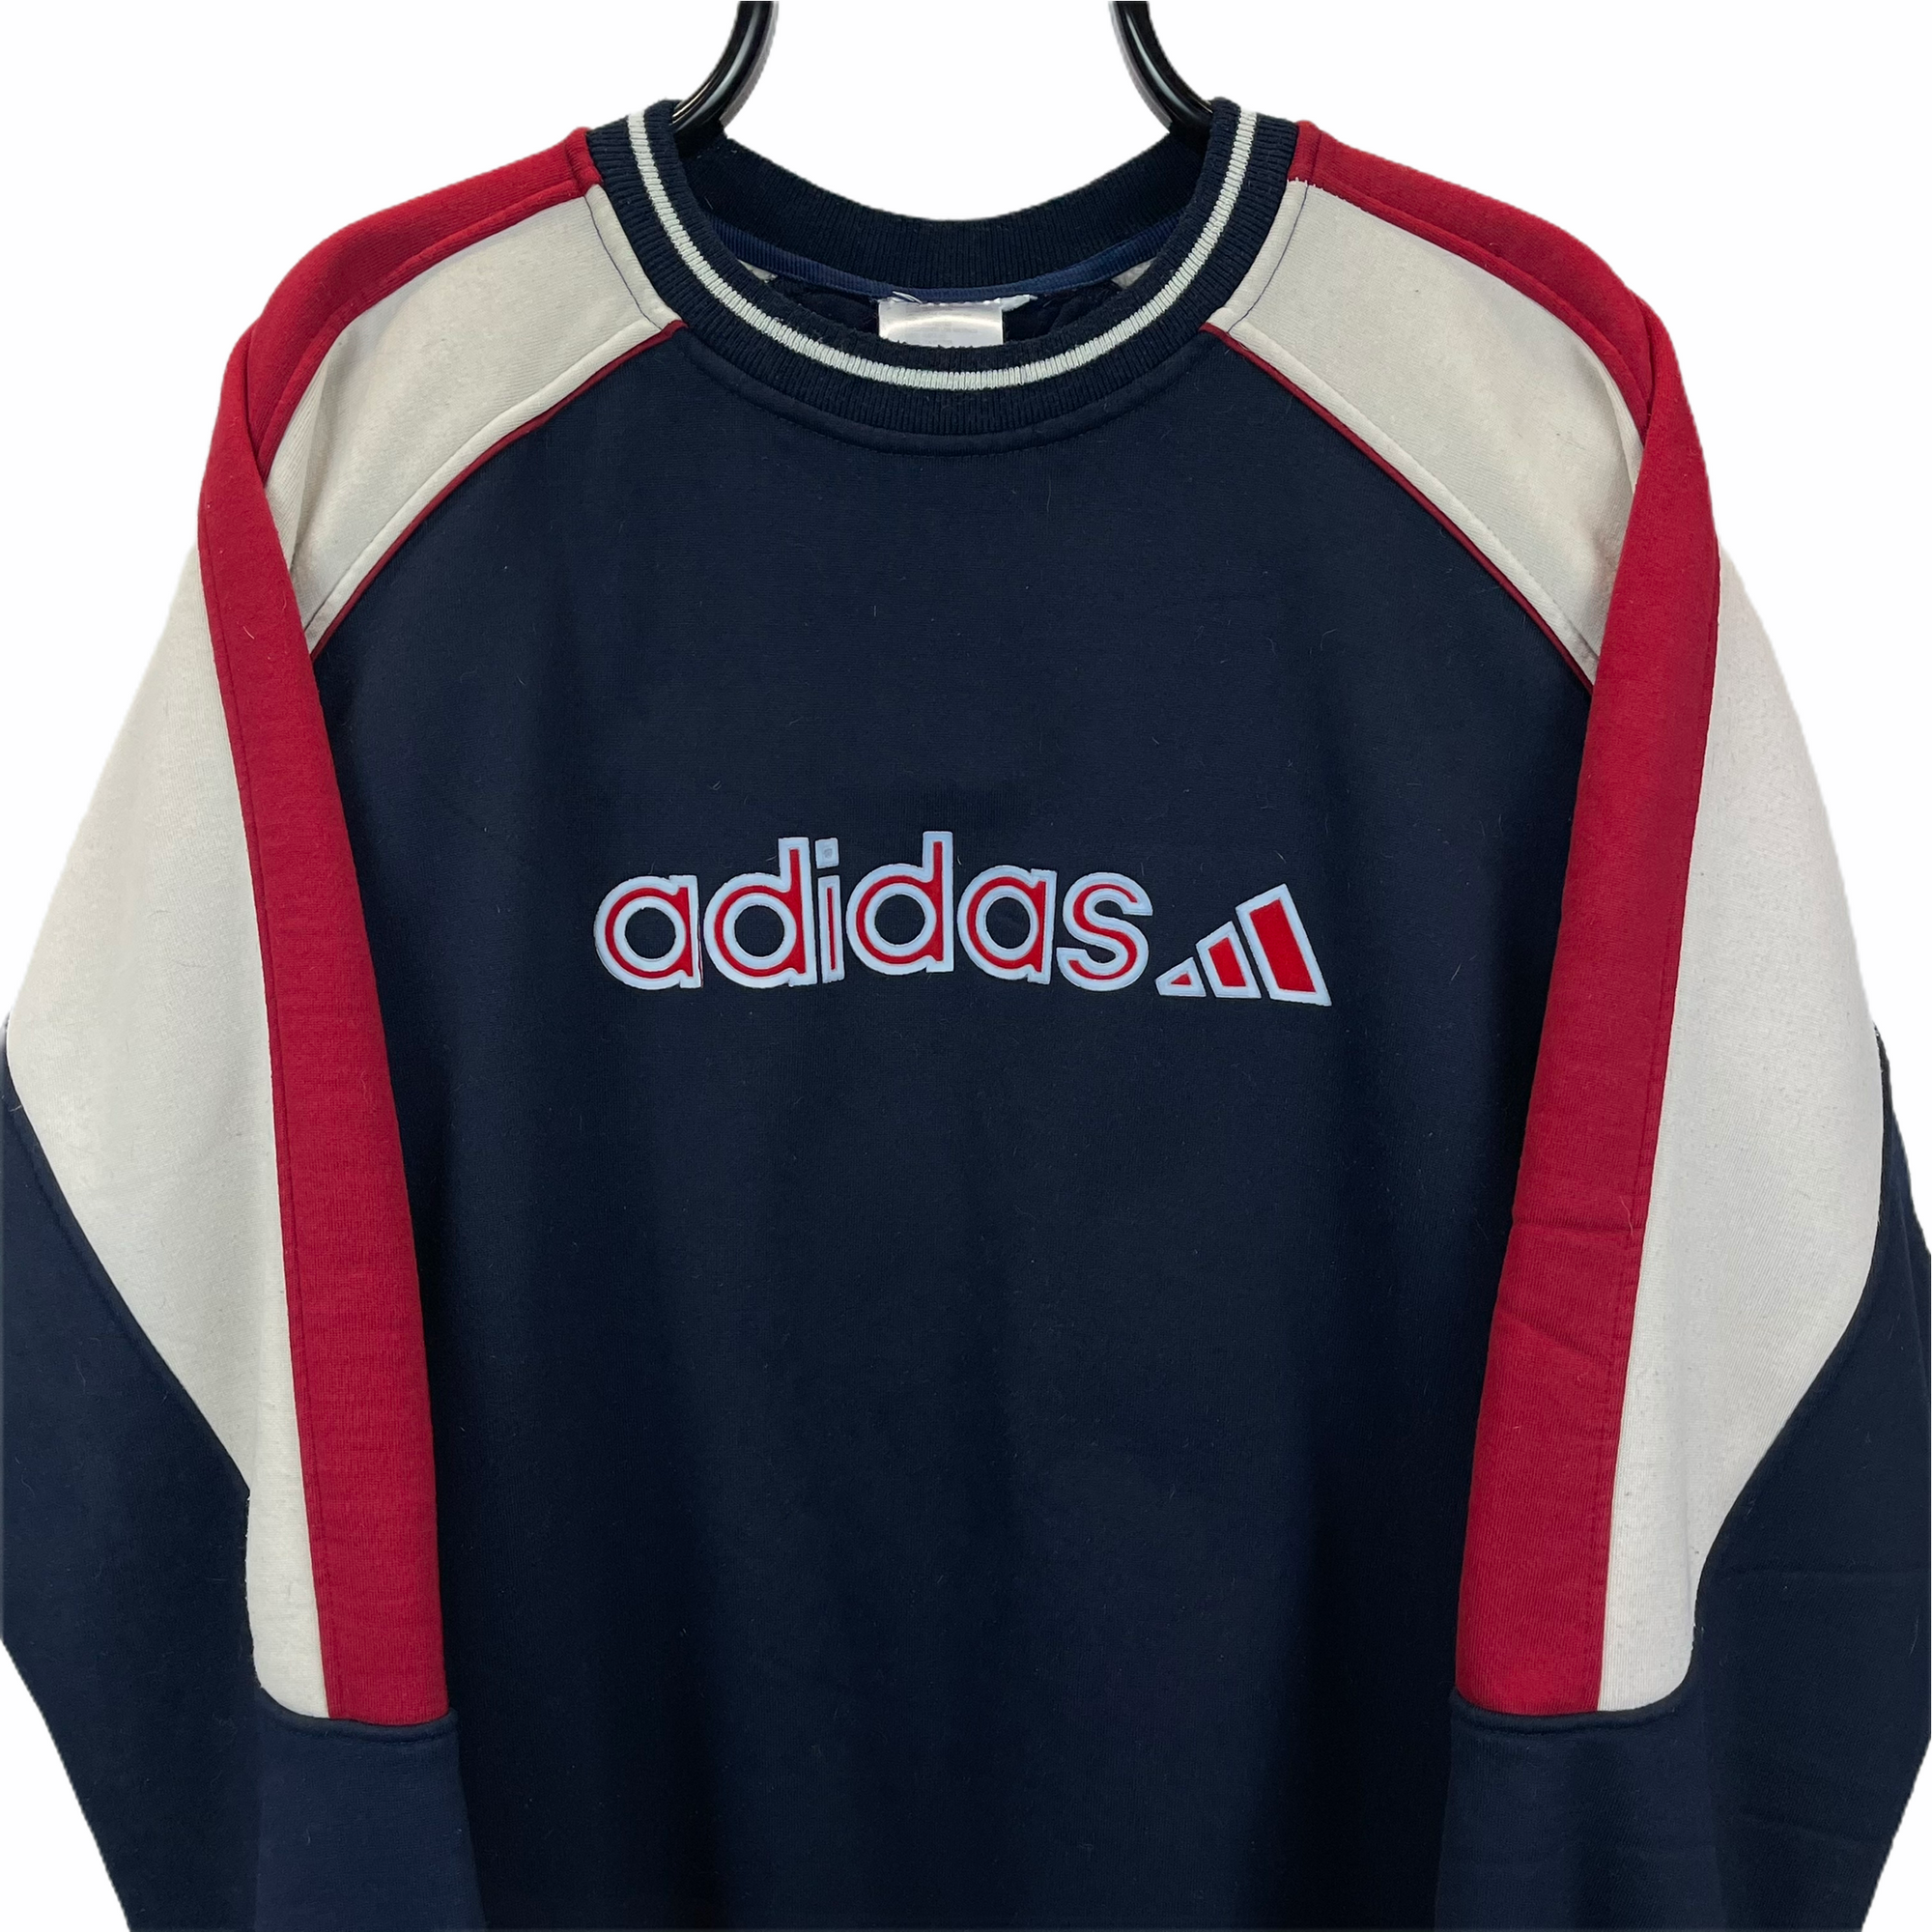 VINTAGE 90S ADIDAS SPELLOUT SWEATSHIRT IN NAVY, RED & STONE - MEN'S LARGE/WOMEN'S XL